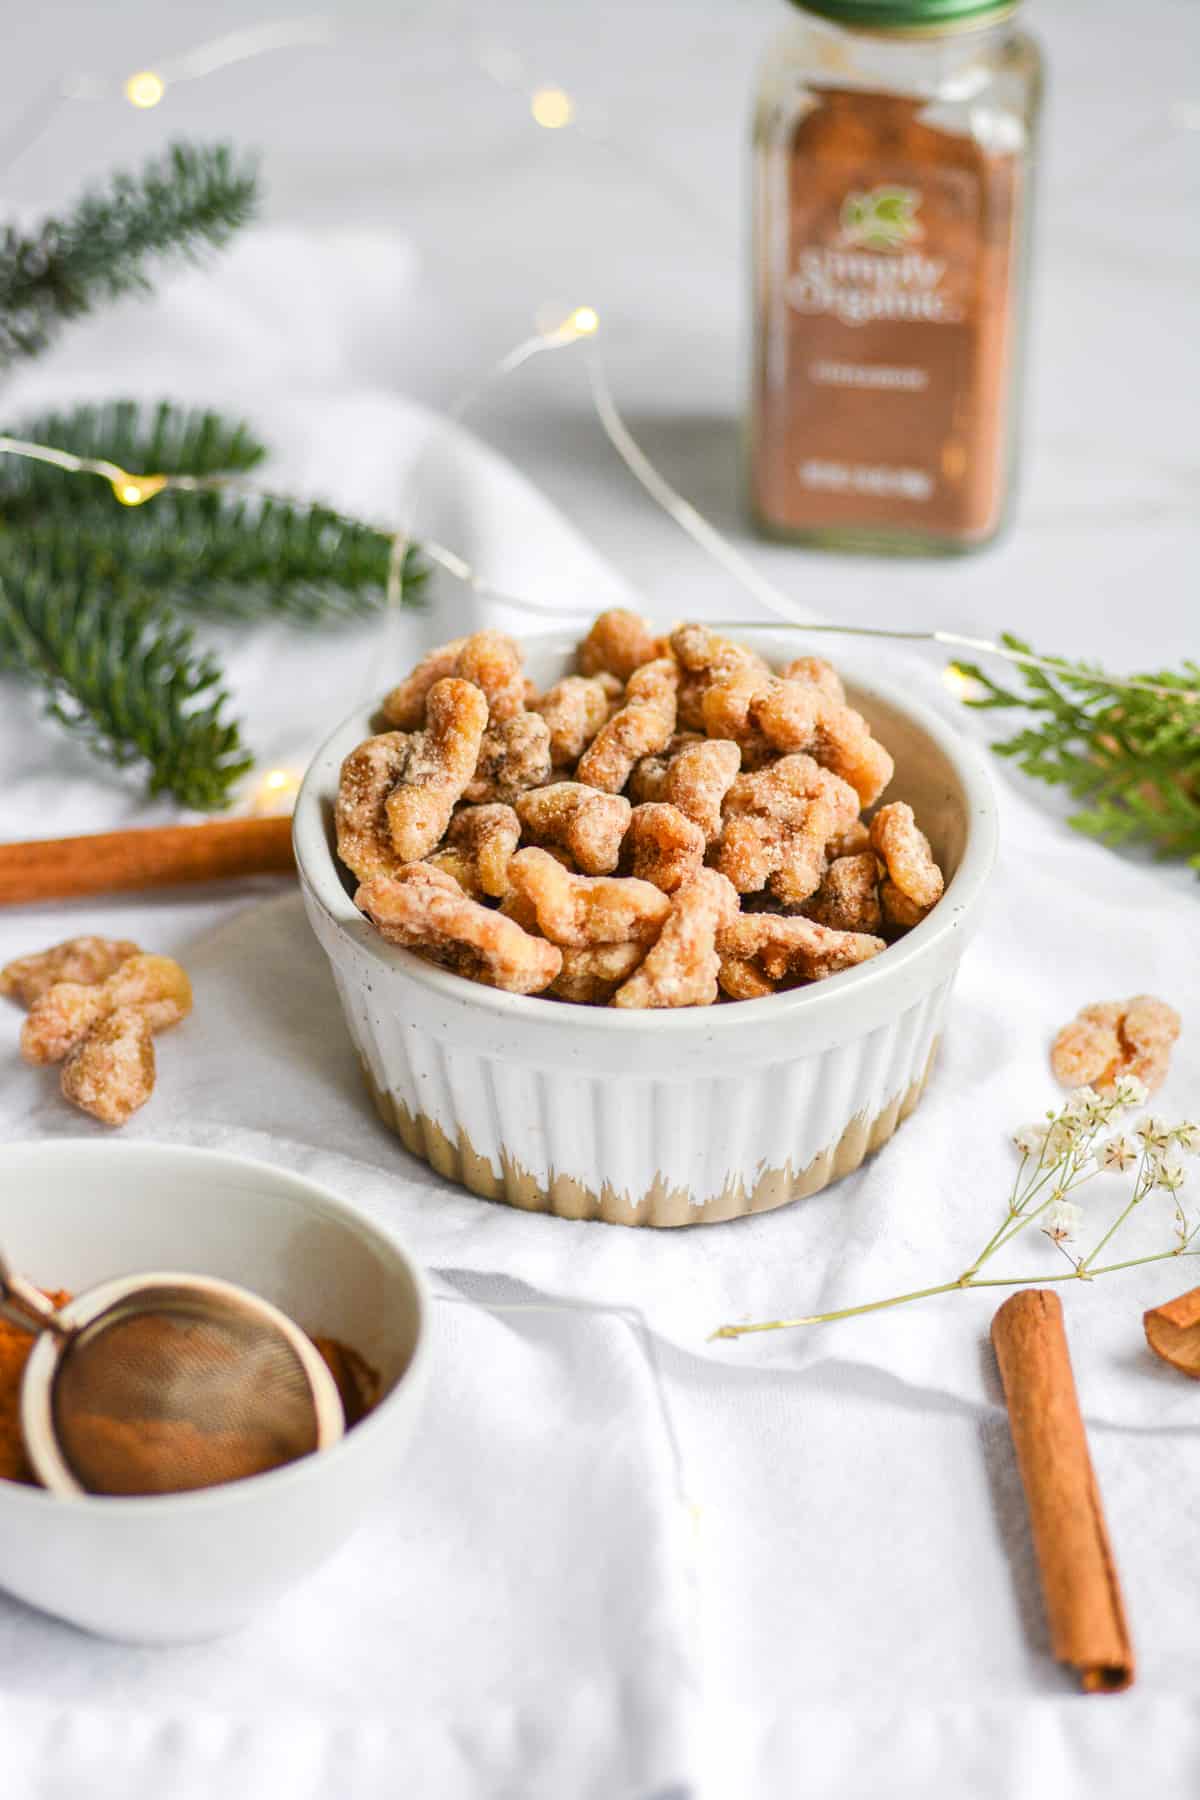 Vegan Cinnamon Sugar Candied Walnuts in a white bowl on a white napkin with cinnamon sticks in the foreground